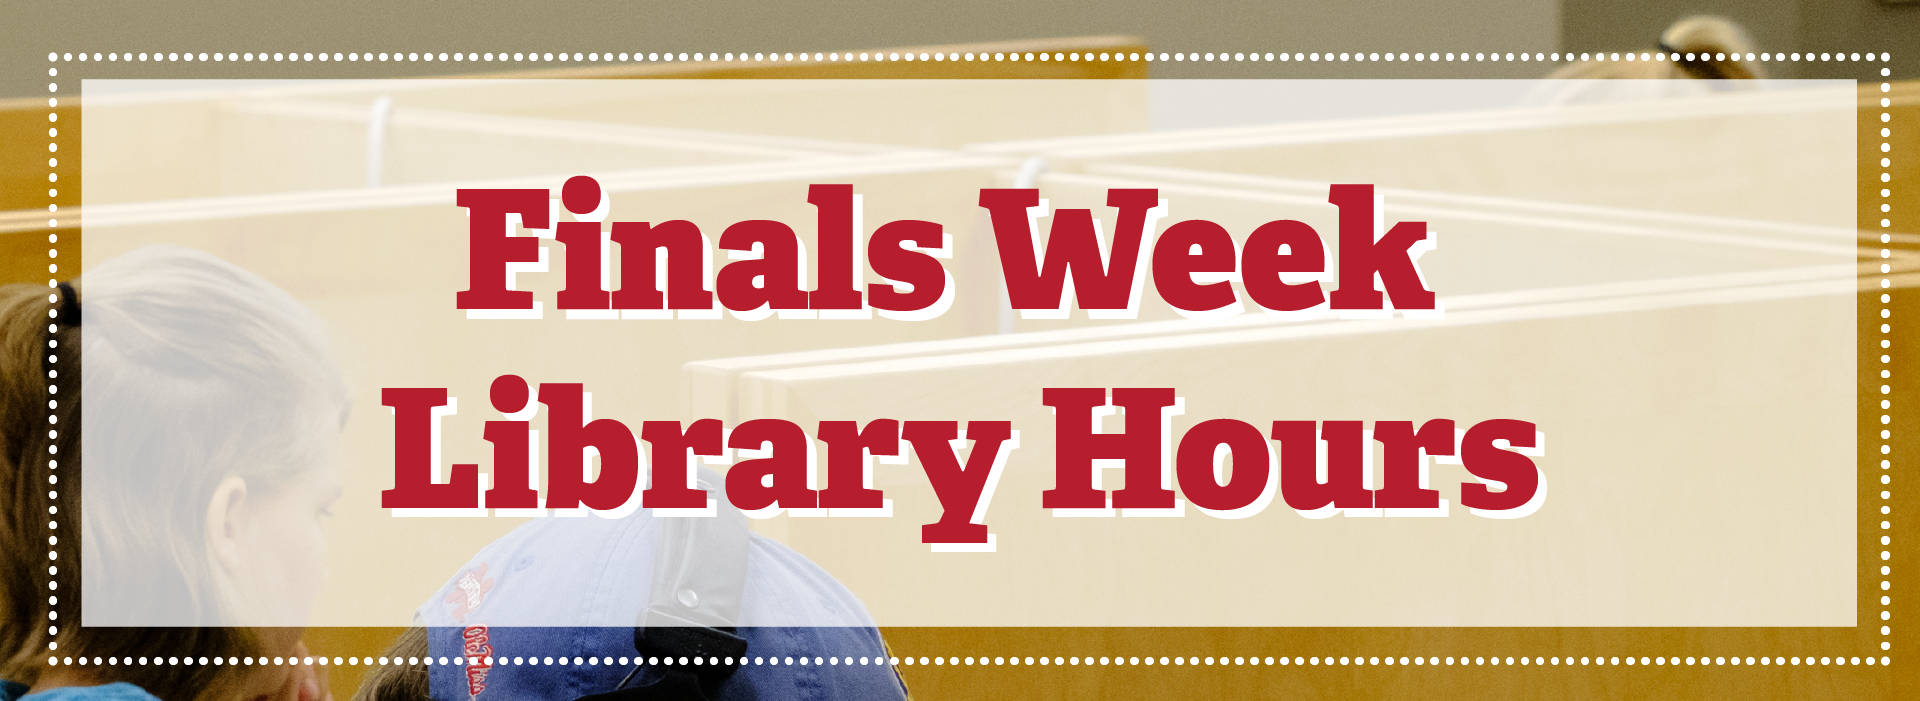 Finals Week Library Hours